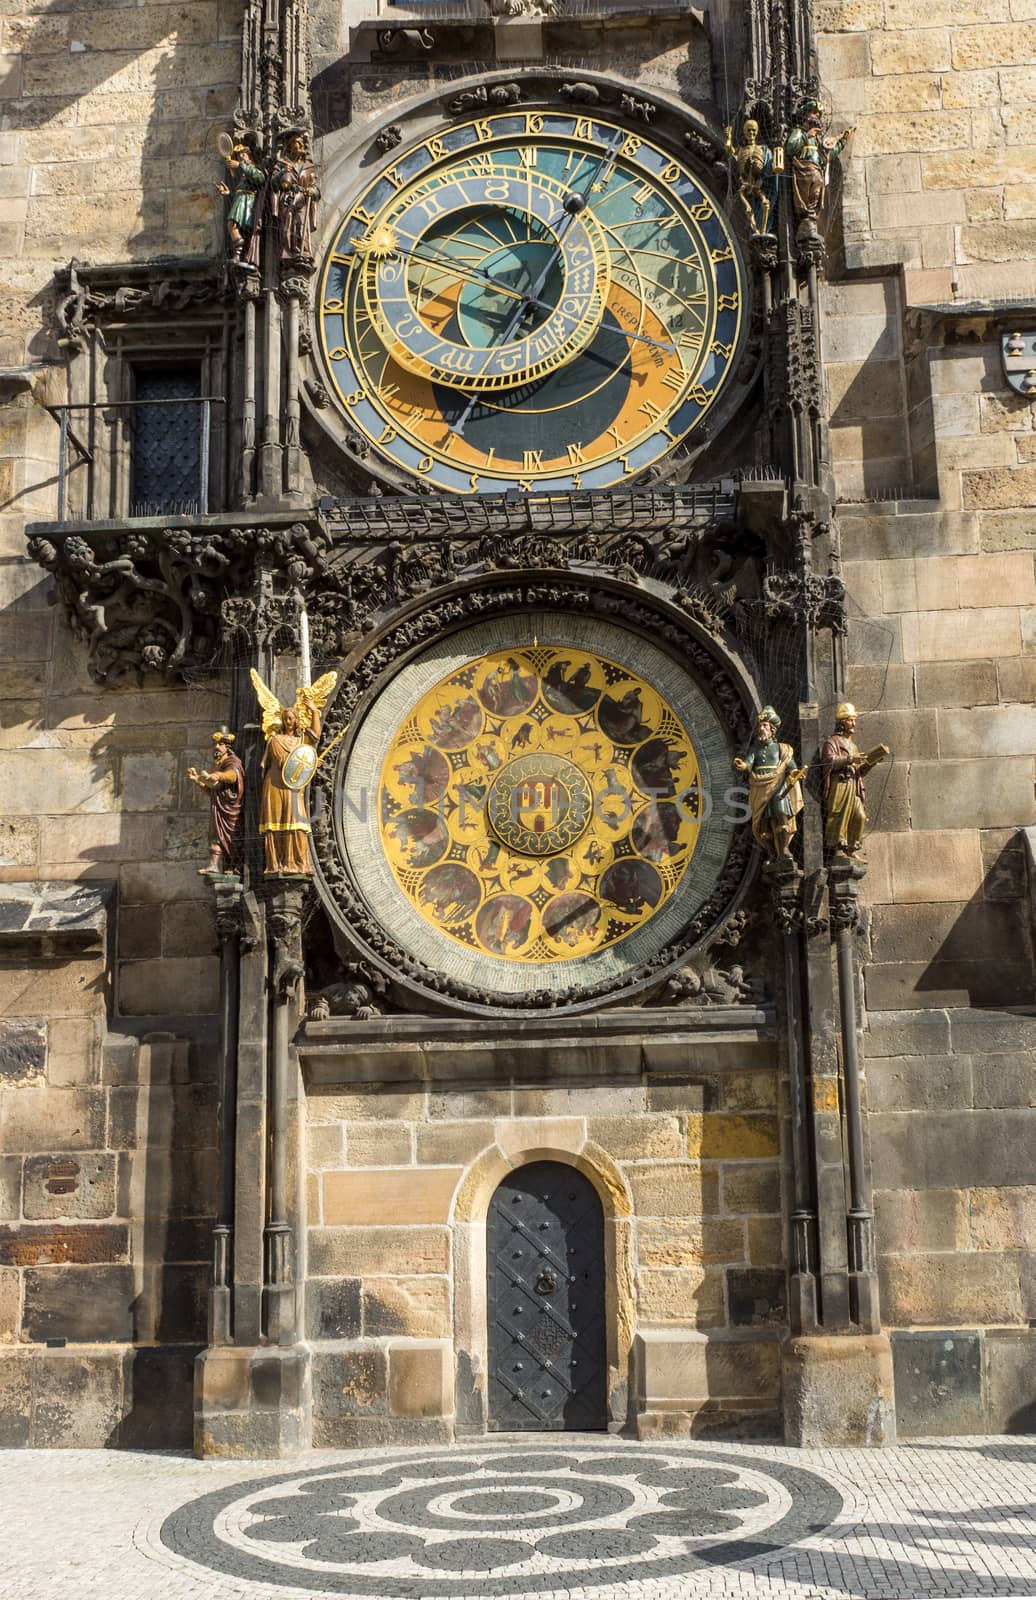 Detail of the famous astronomical clock in Prague